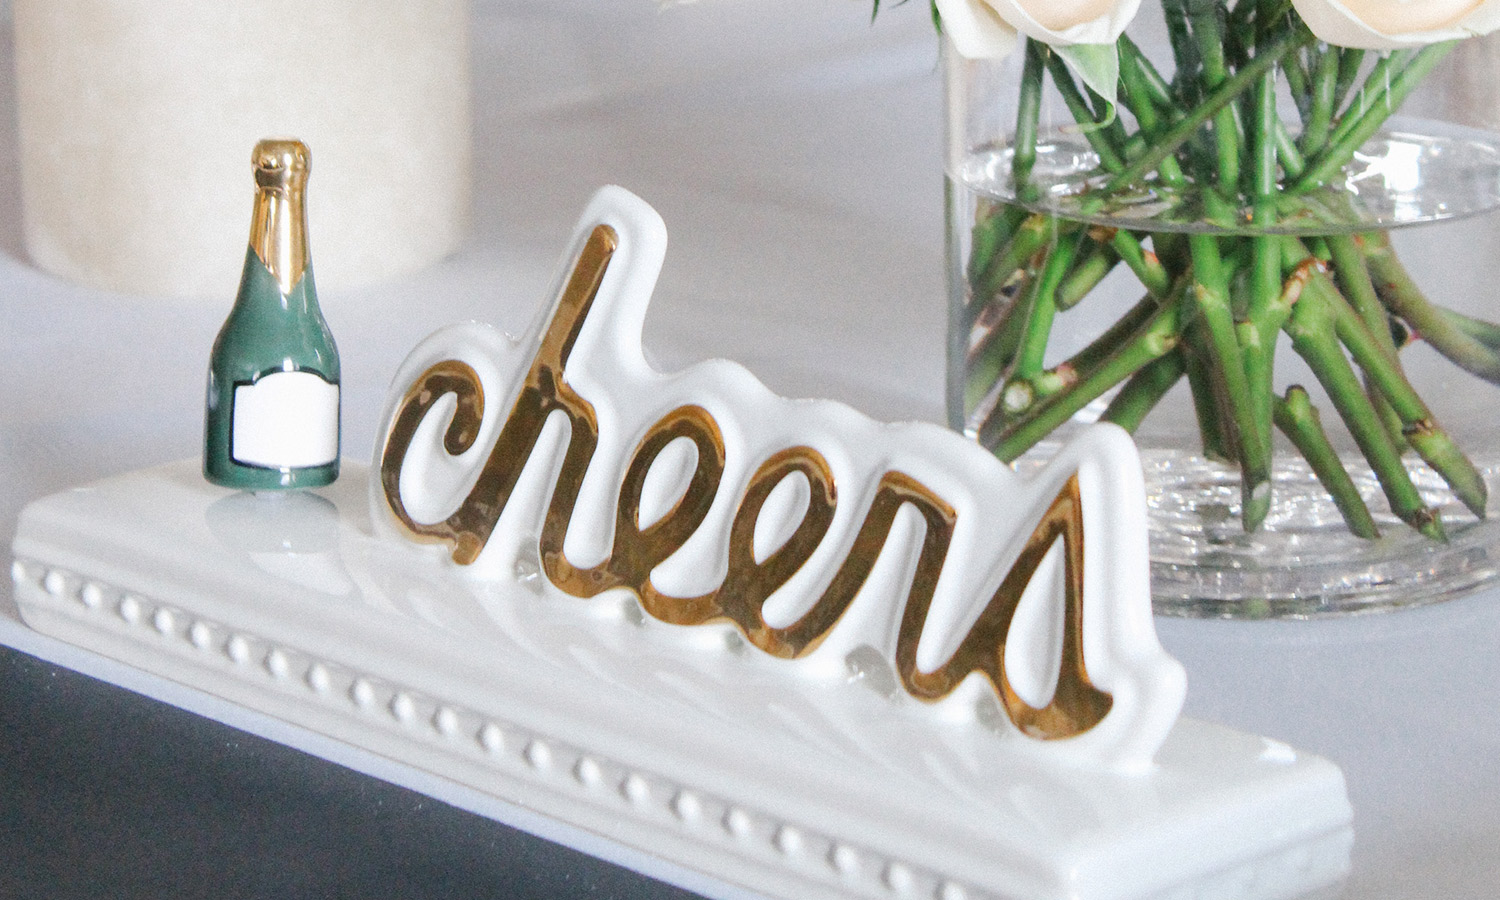 nora fleming cheers sign